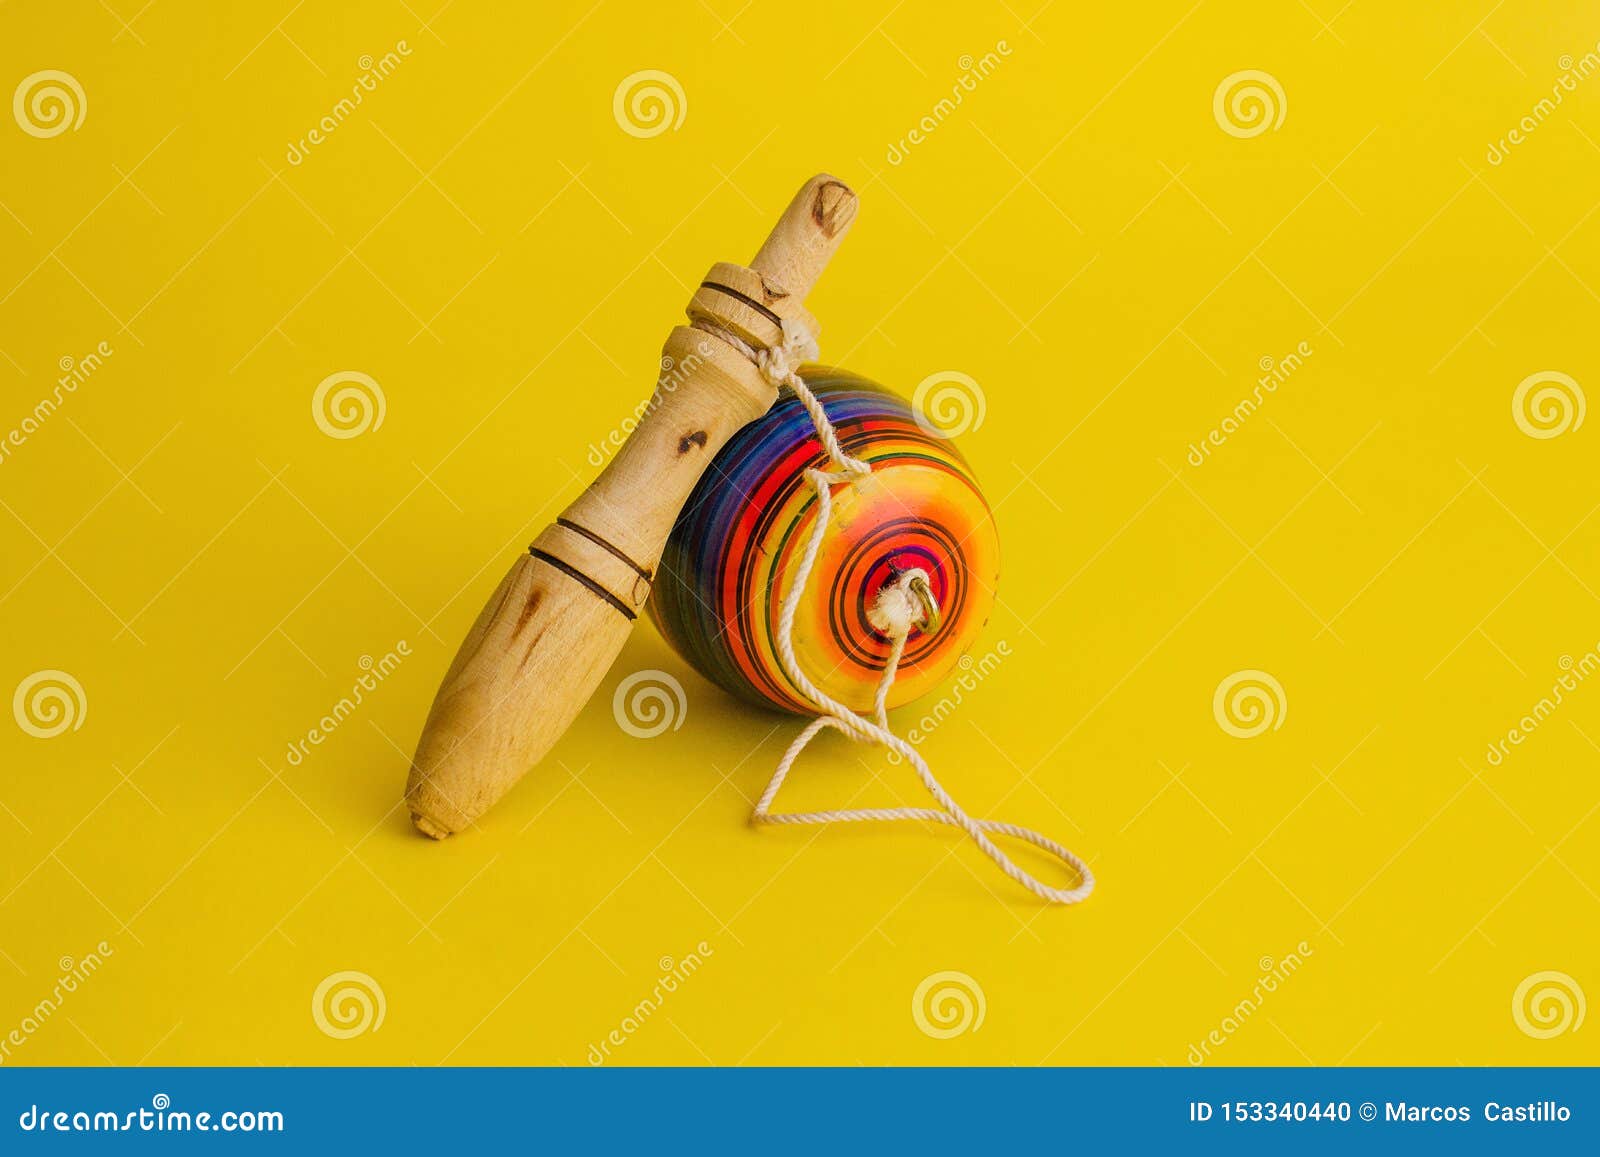 mexican toys from wooden, balero, yoyo and trompo in mexico on a yellow background